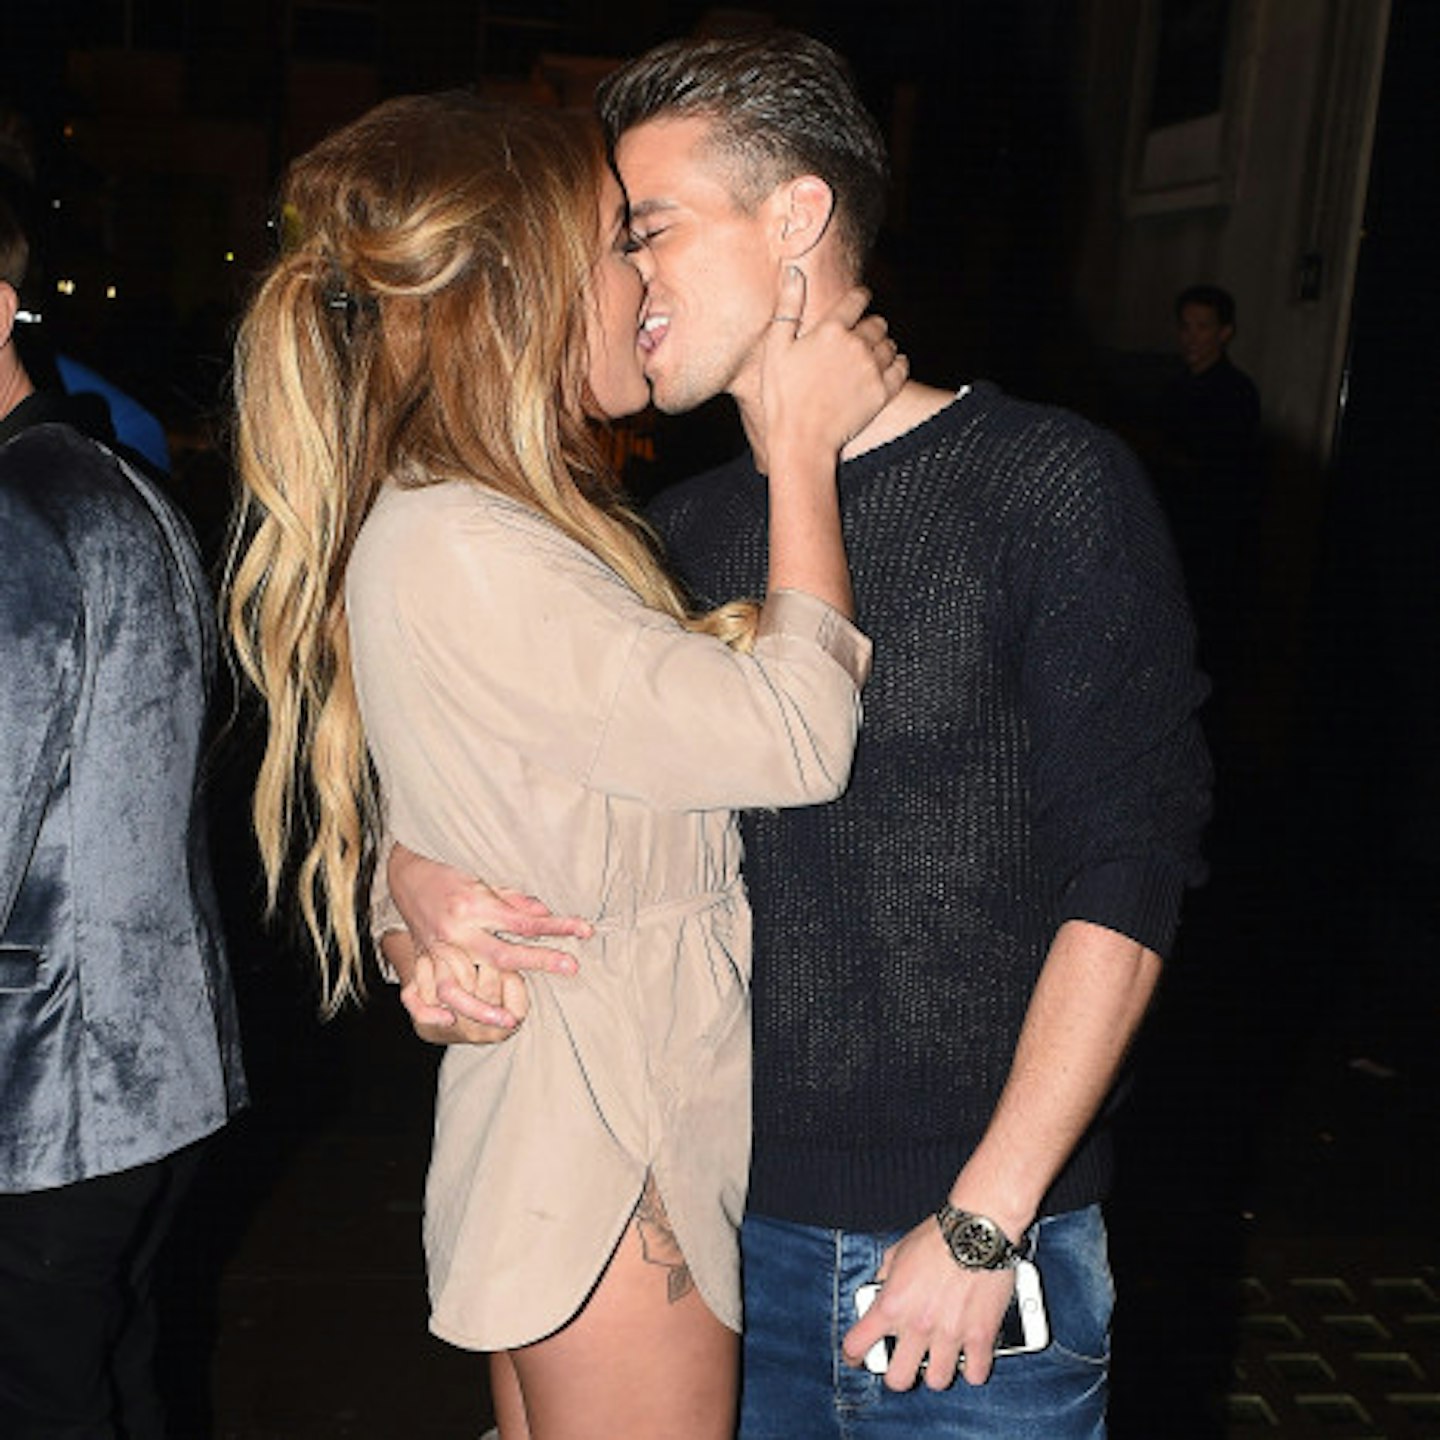 Gaz and Charlotte recently confirmed their relationship